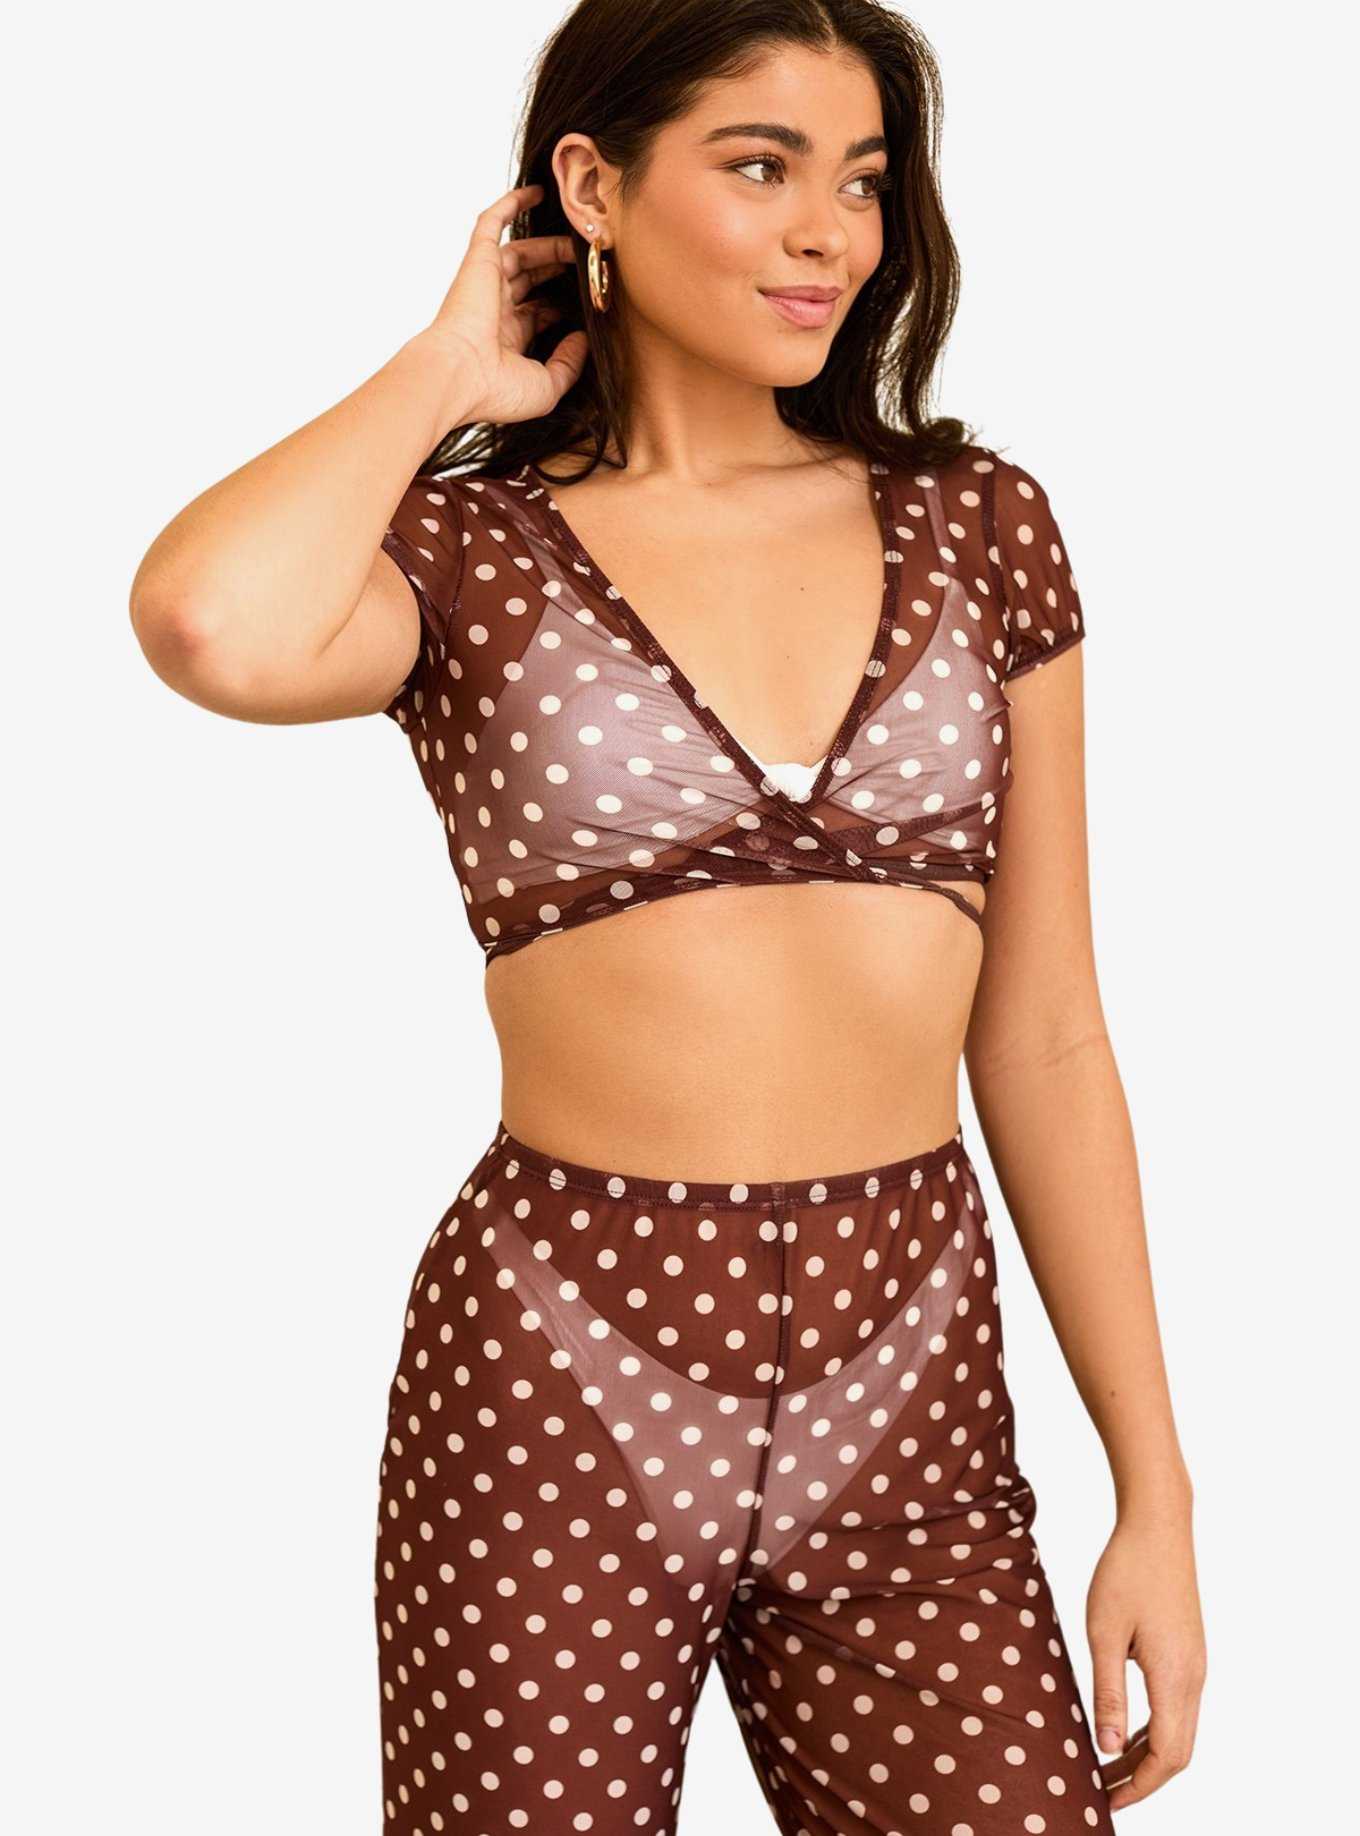 Dippin' Daisy's Cher Swim Cover-Up Top Dotted Brown, , hi-res